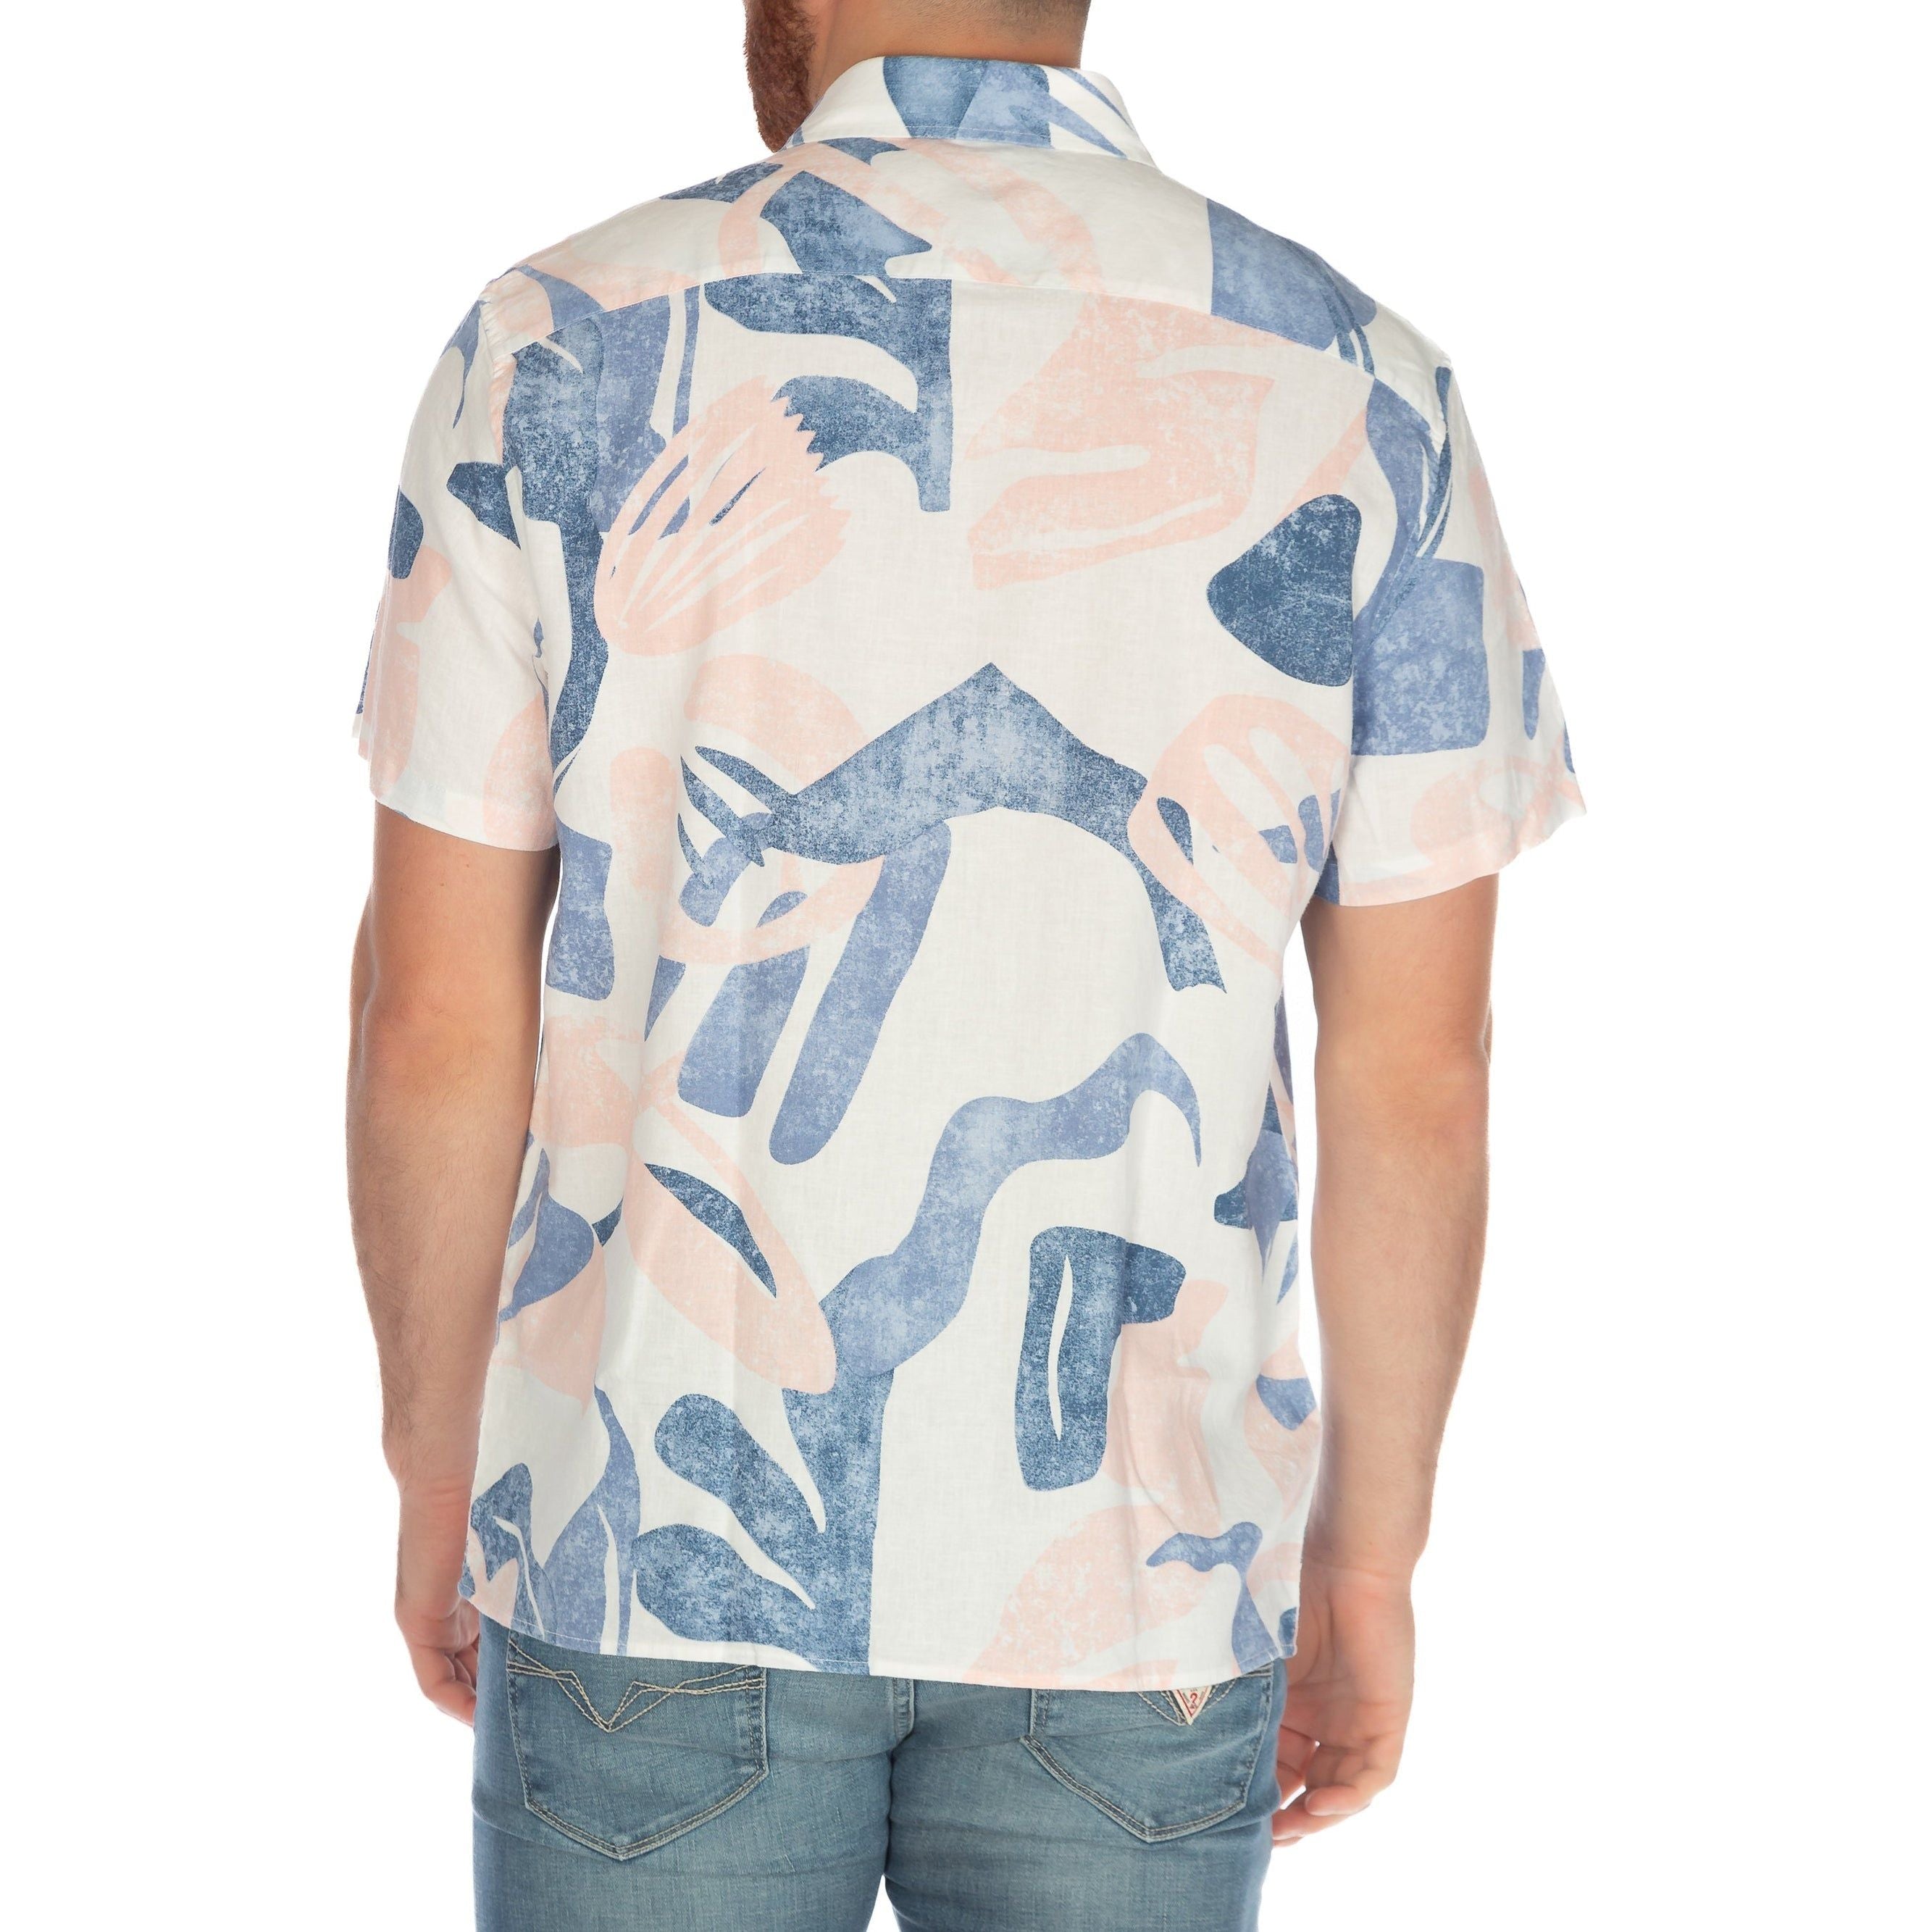 Guess - Collin Inside Printed Shirt in Pink/Blue Abstact